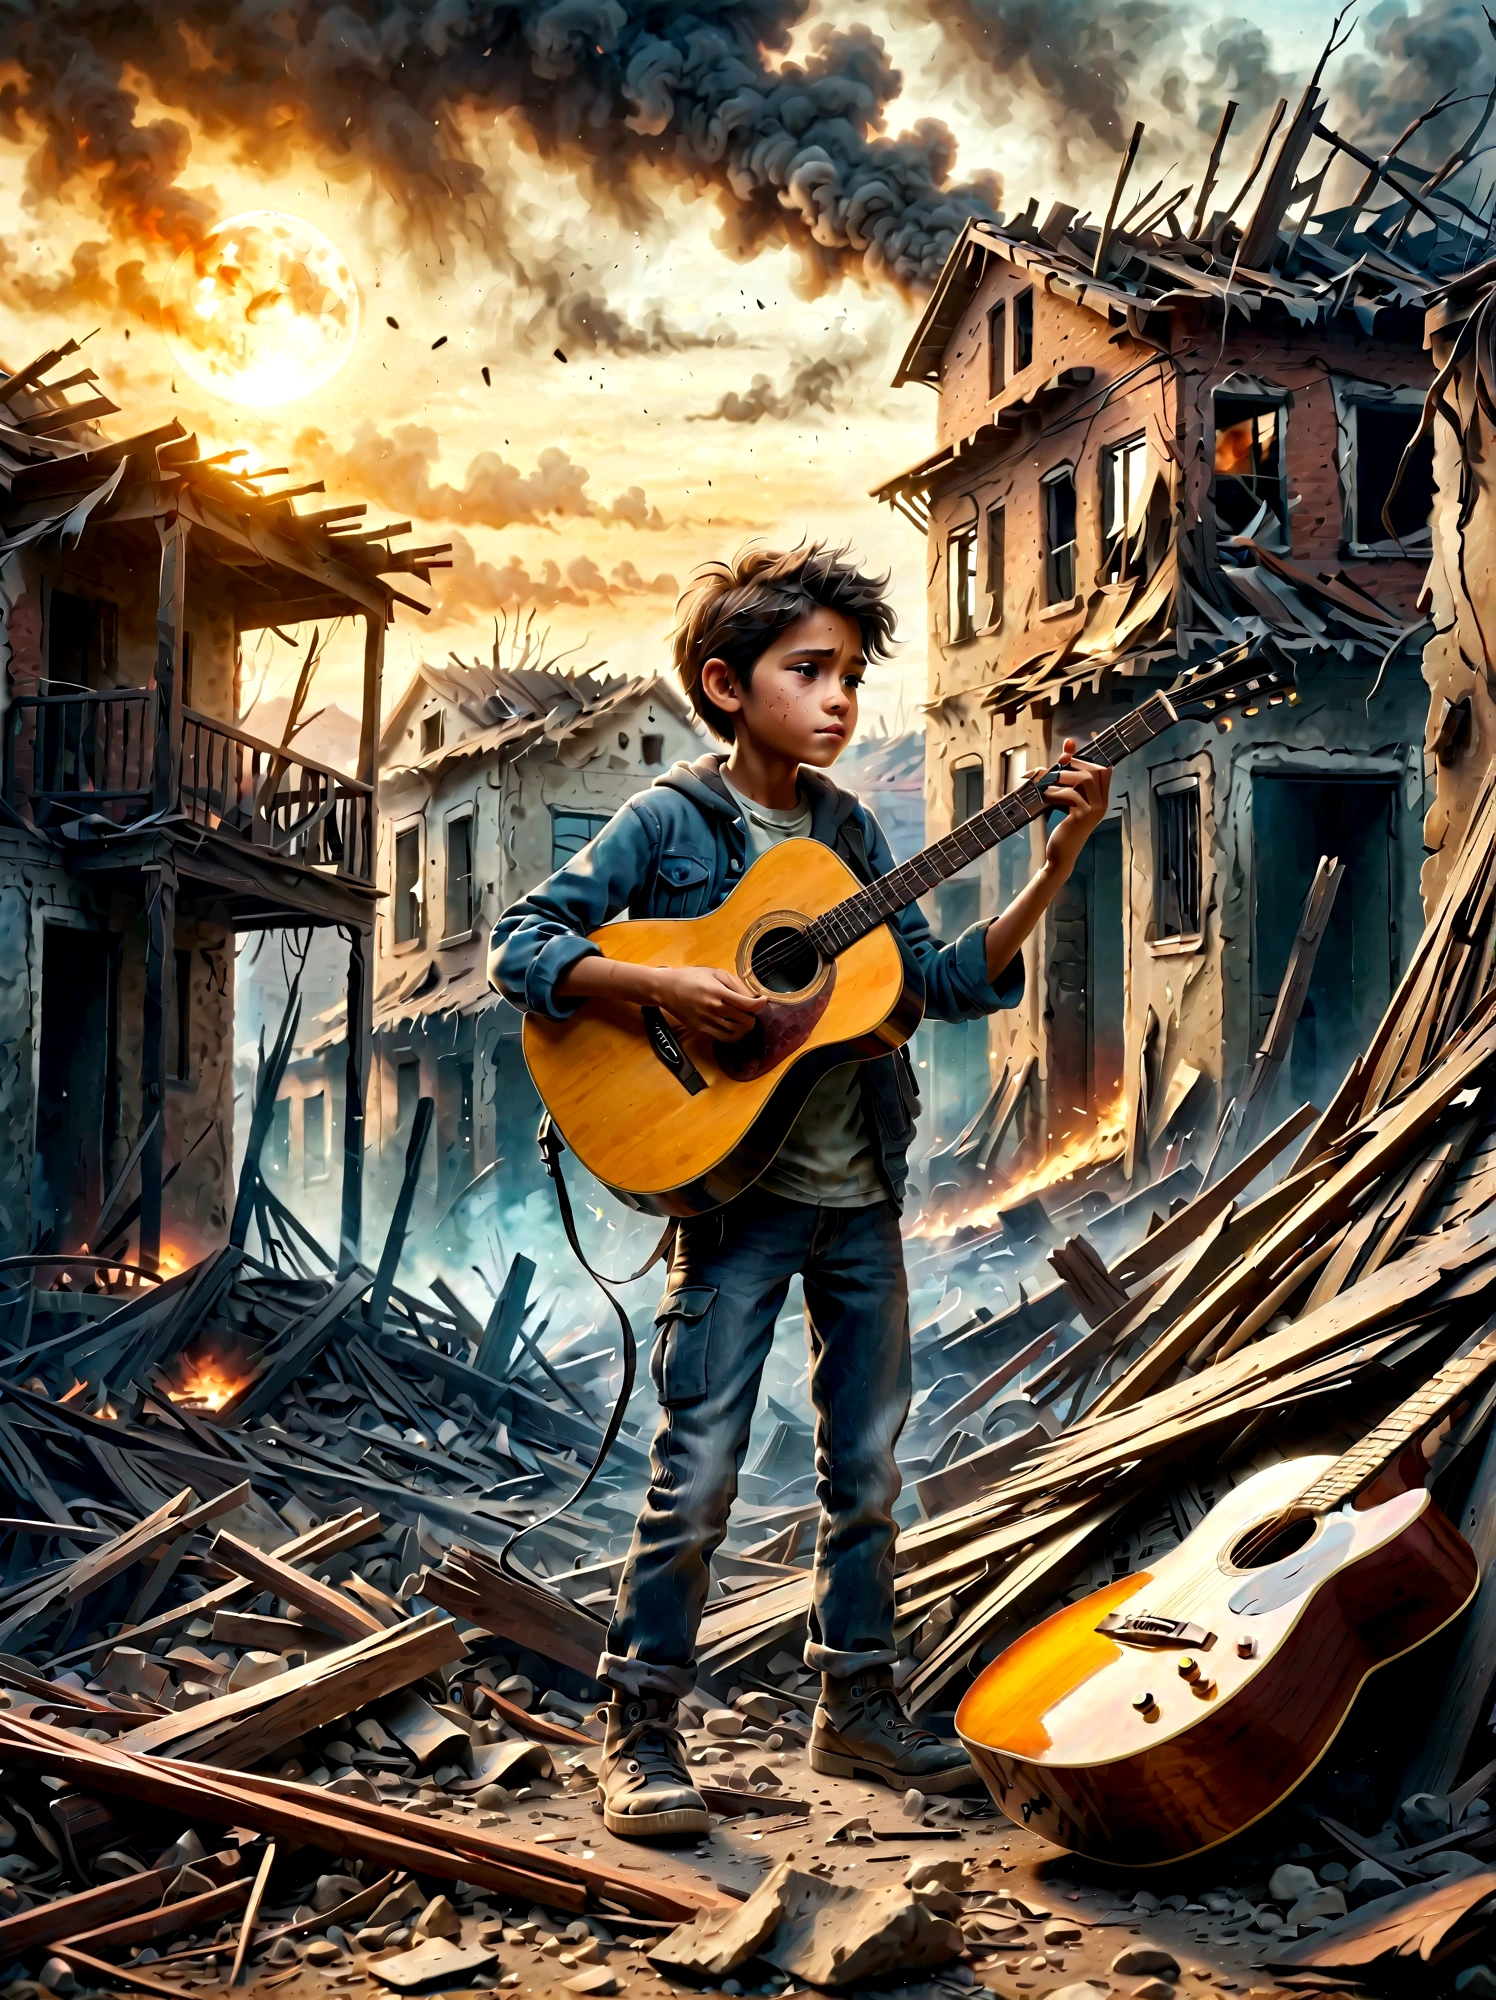 In the midst of a war-torn, smoky ruin, a  child is playing a guitar. The scene captures the stark contrast between the devastation of the surroundings and the innocence of the . The ruins are filled with debris and remnants of buildings, with smoke and fire in the background. The child's expression is somber, reflecting the harsh reality of the situation. The overall mood is poignant and emotional, with muted colors and dramatic lighting to emphasize the desolation and the glimmer of hope represented by the music.